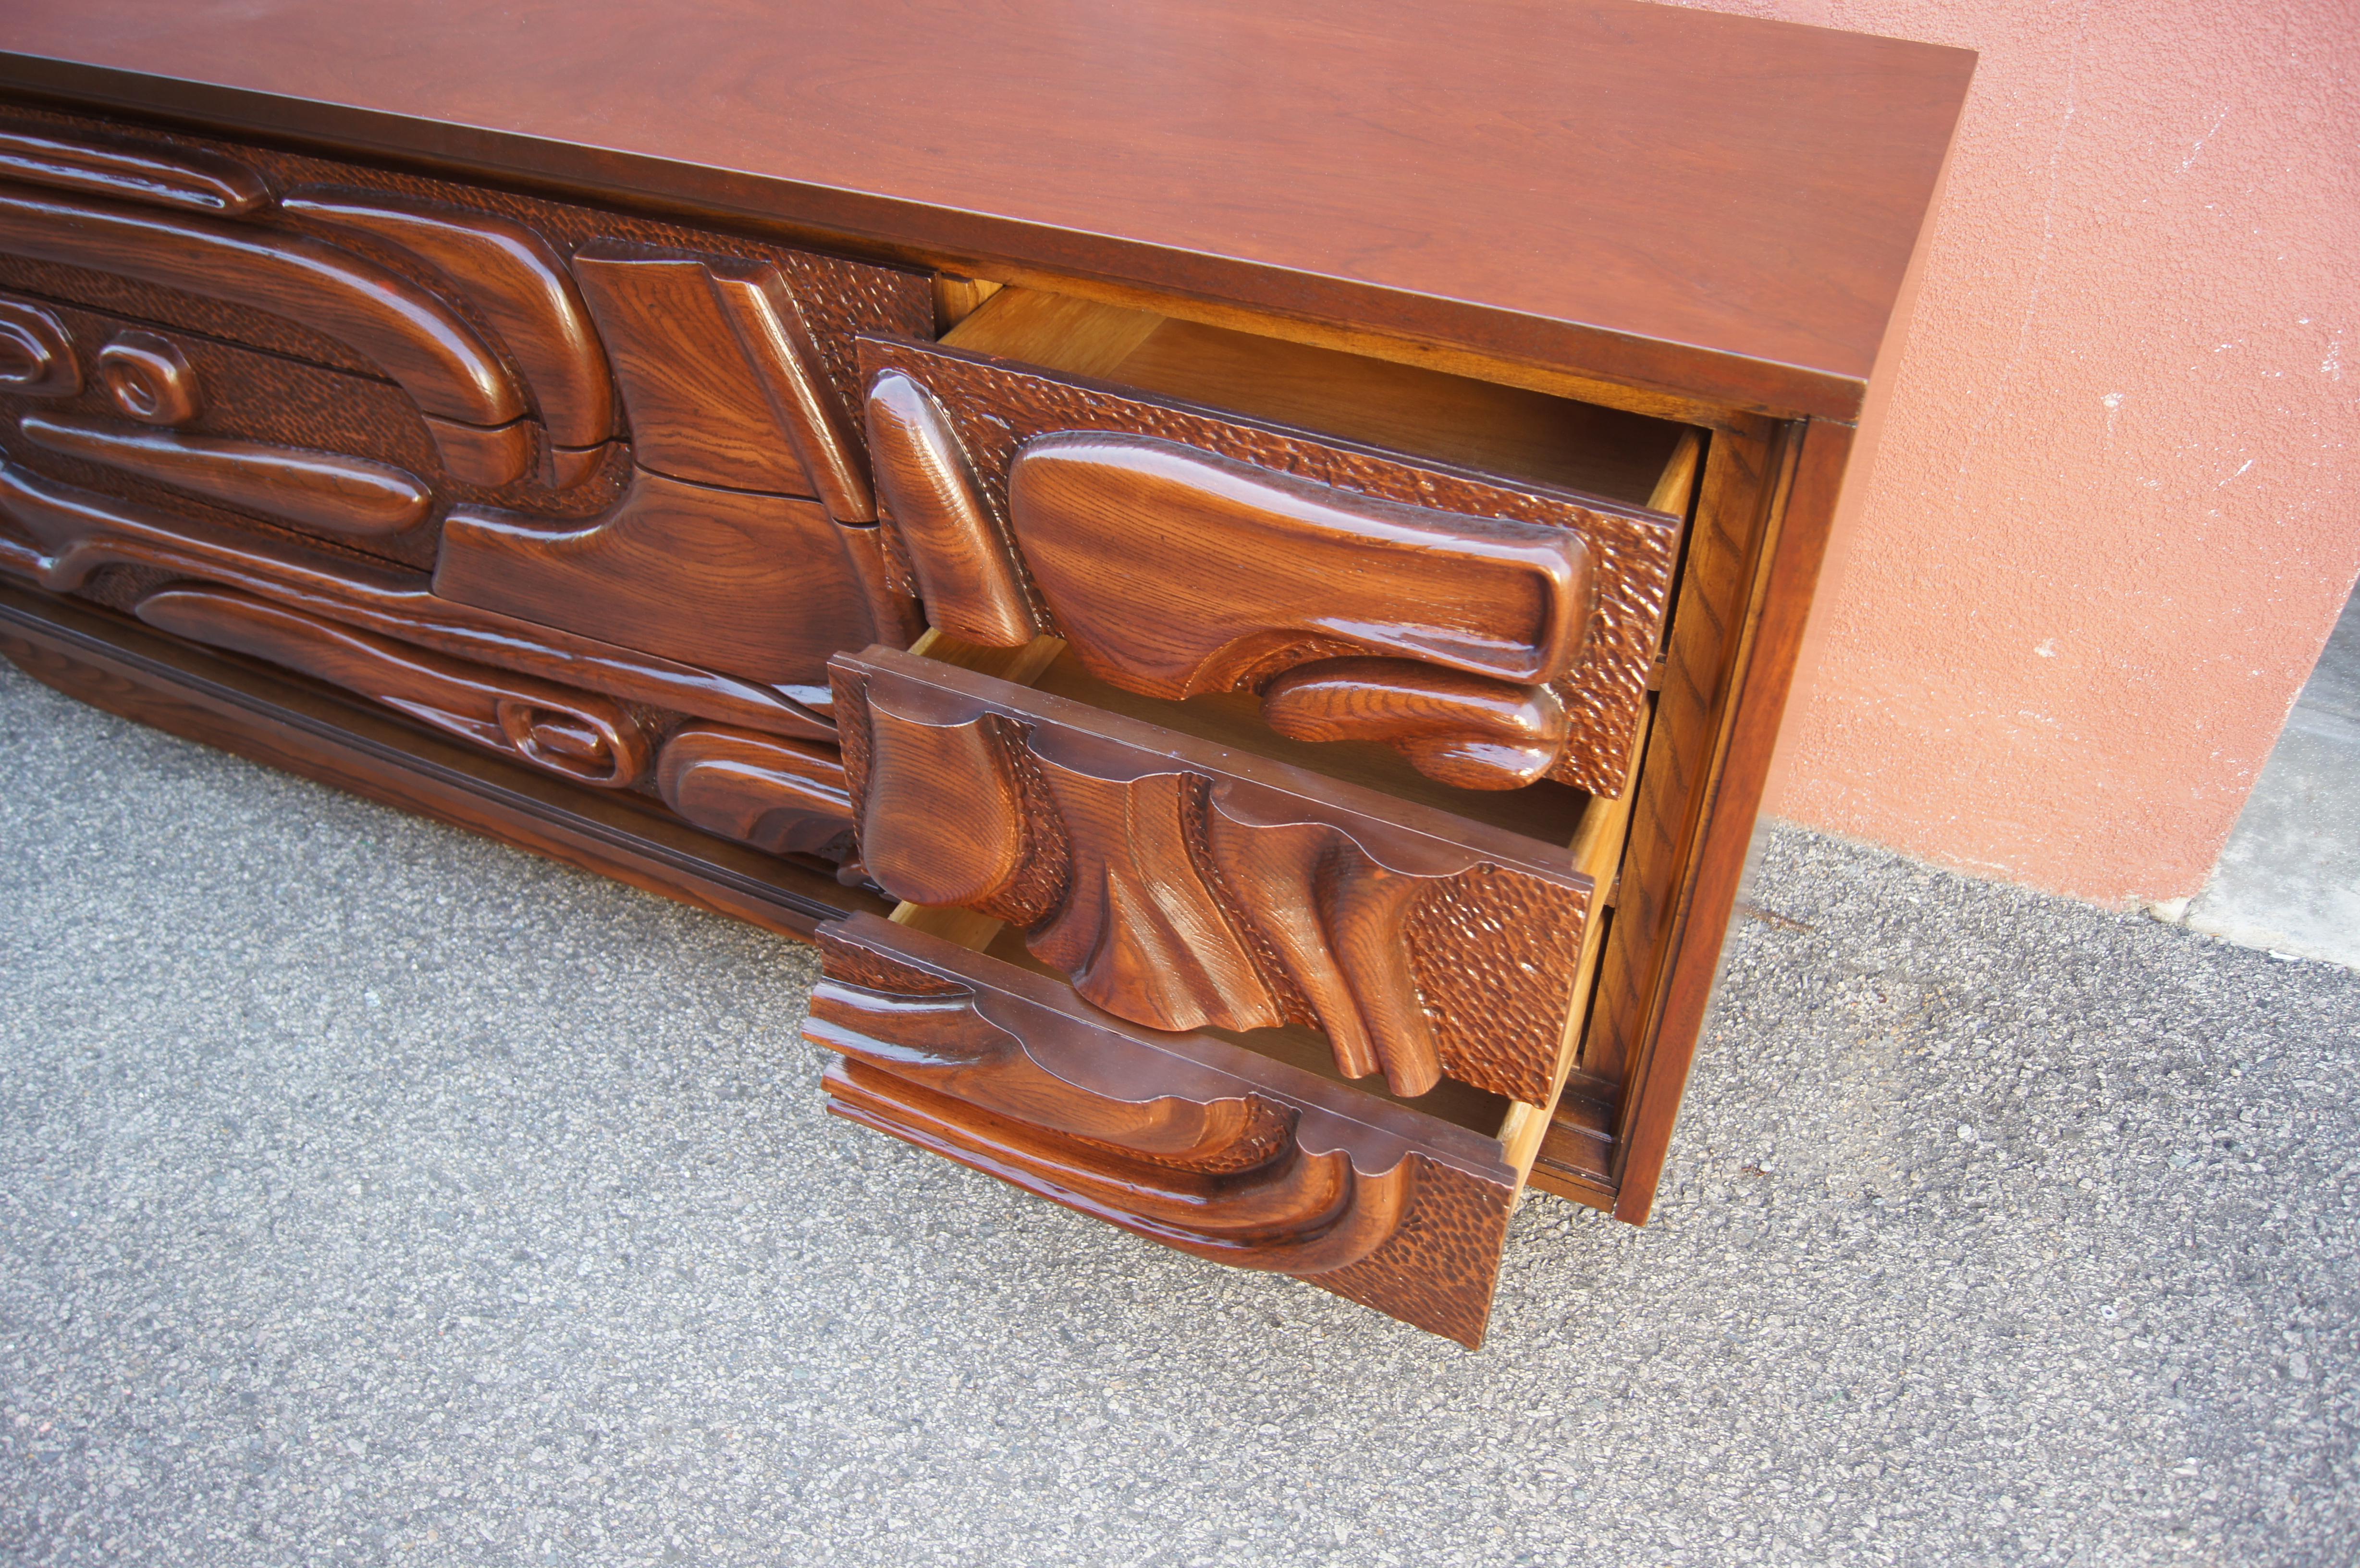 American Lacquered Walnut Oceanic Series Low Dresser by Pulaski Furniture